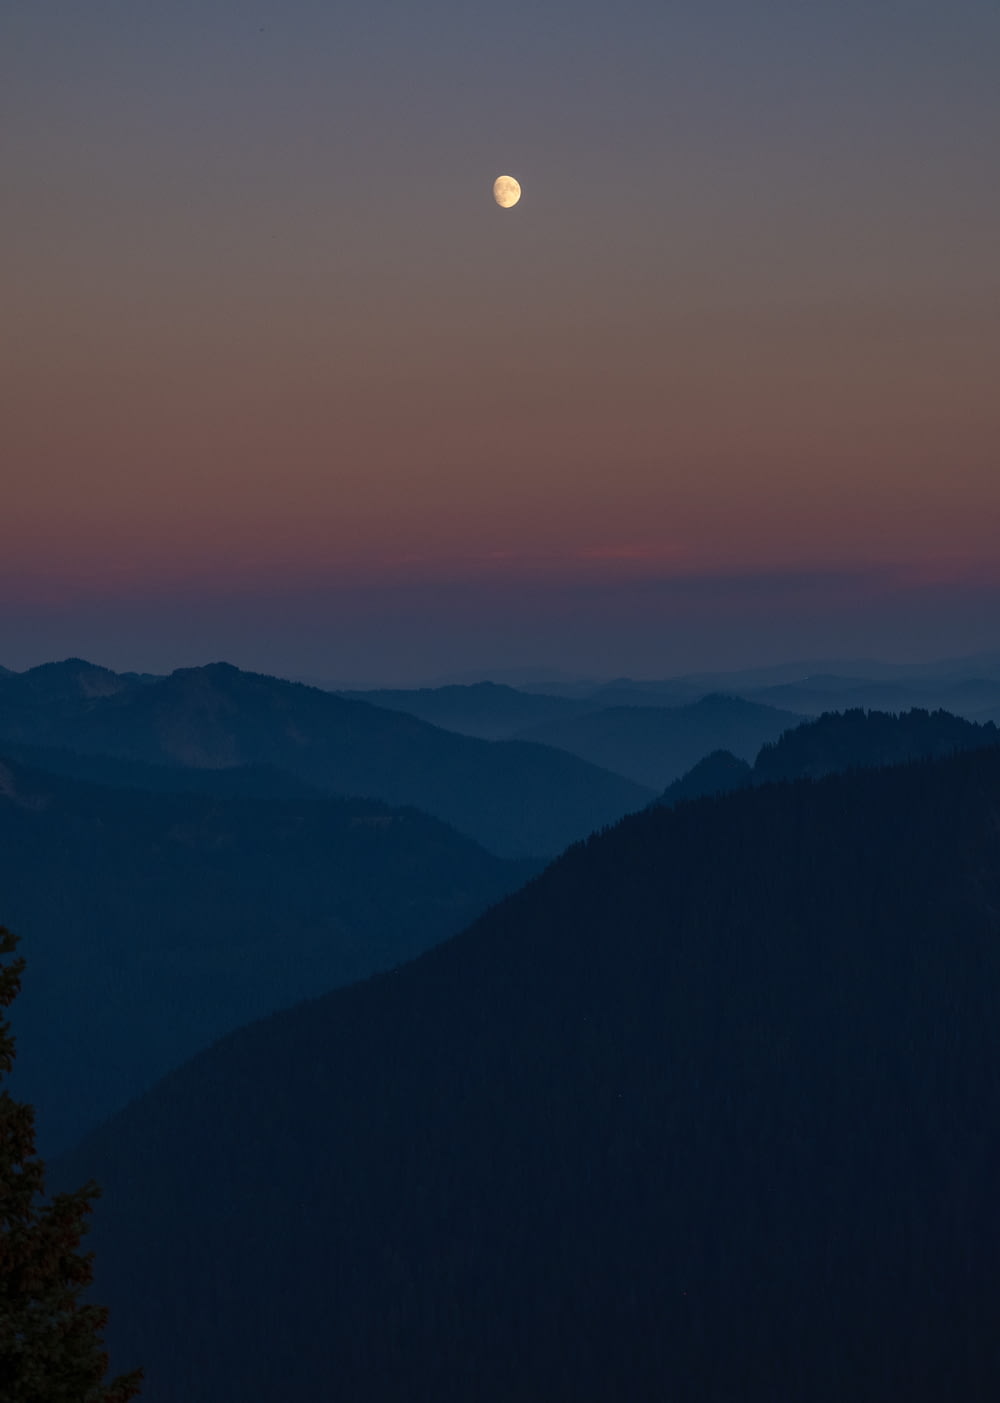 a full moon is seen over a mountain range